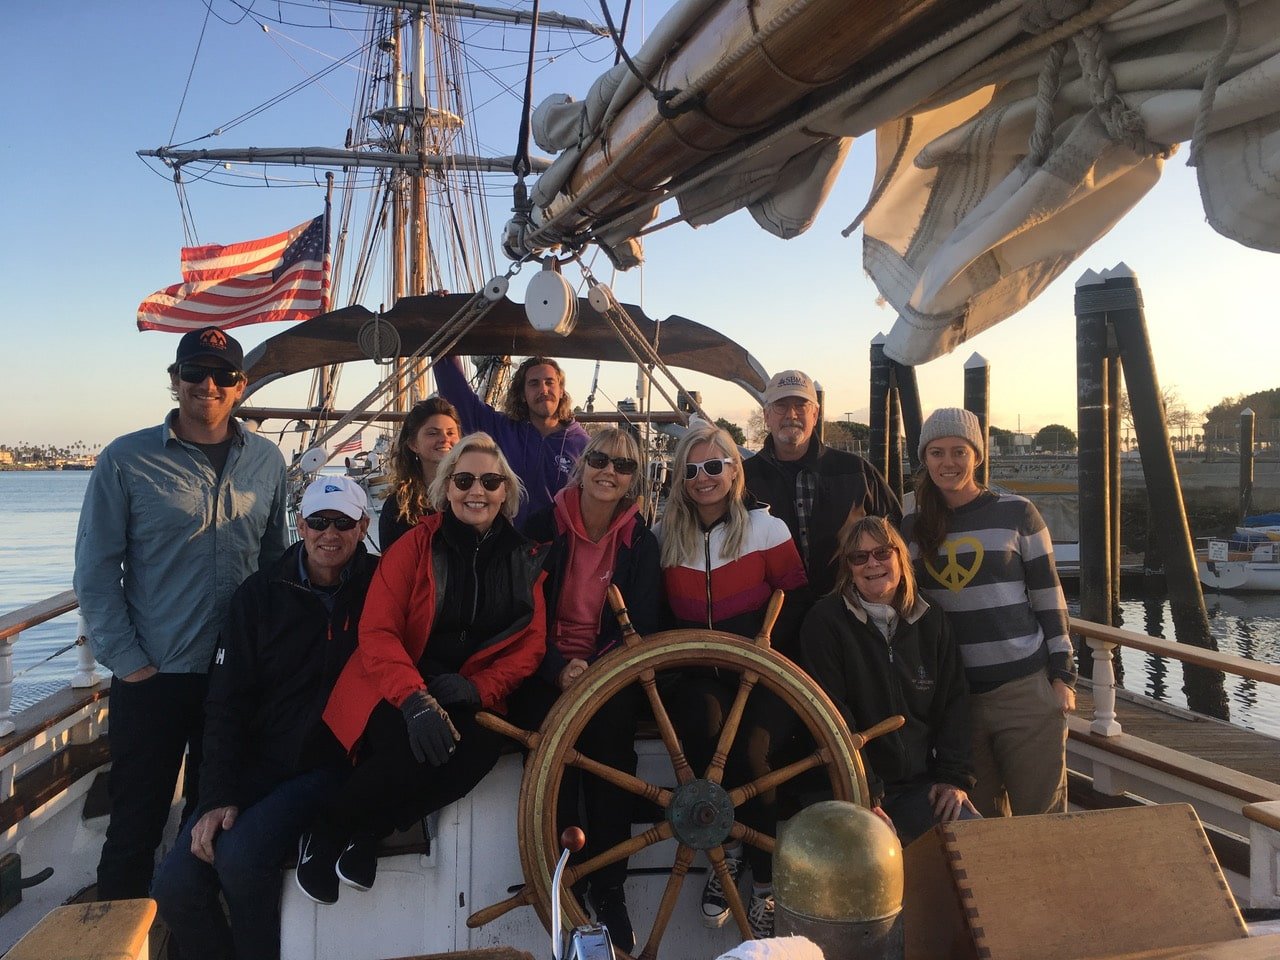   A 2021 maritime medicine class in Los Angeles posing together on the sailboat.  